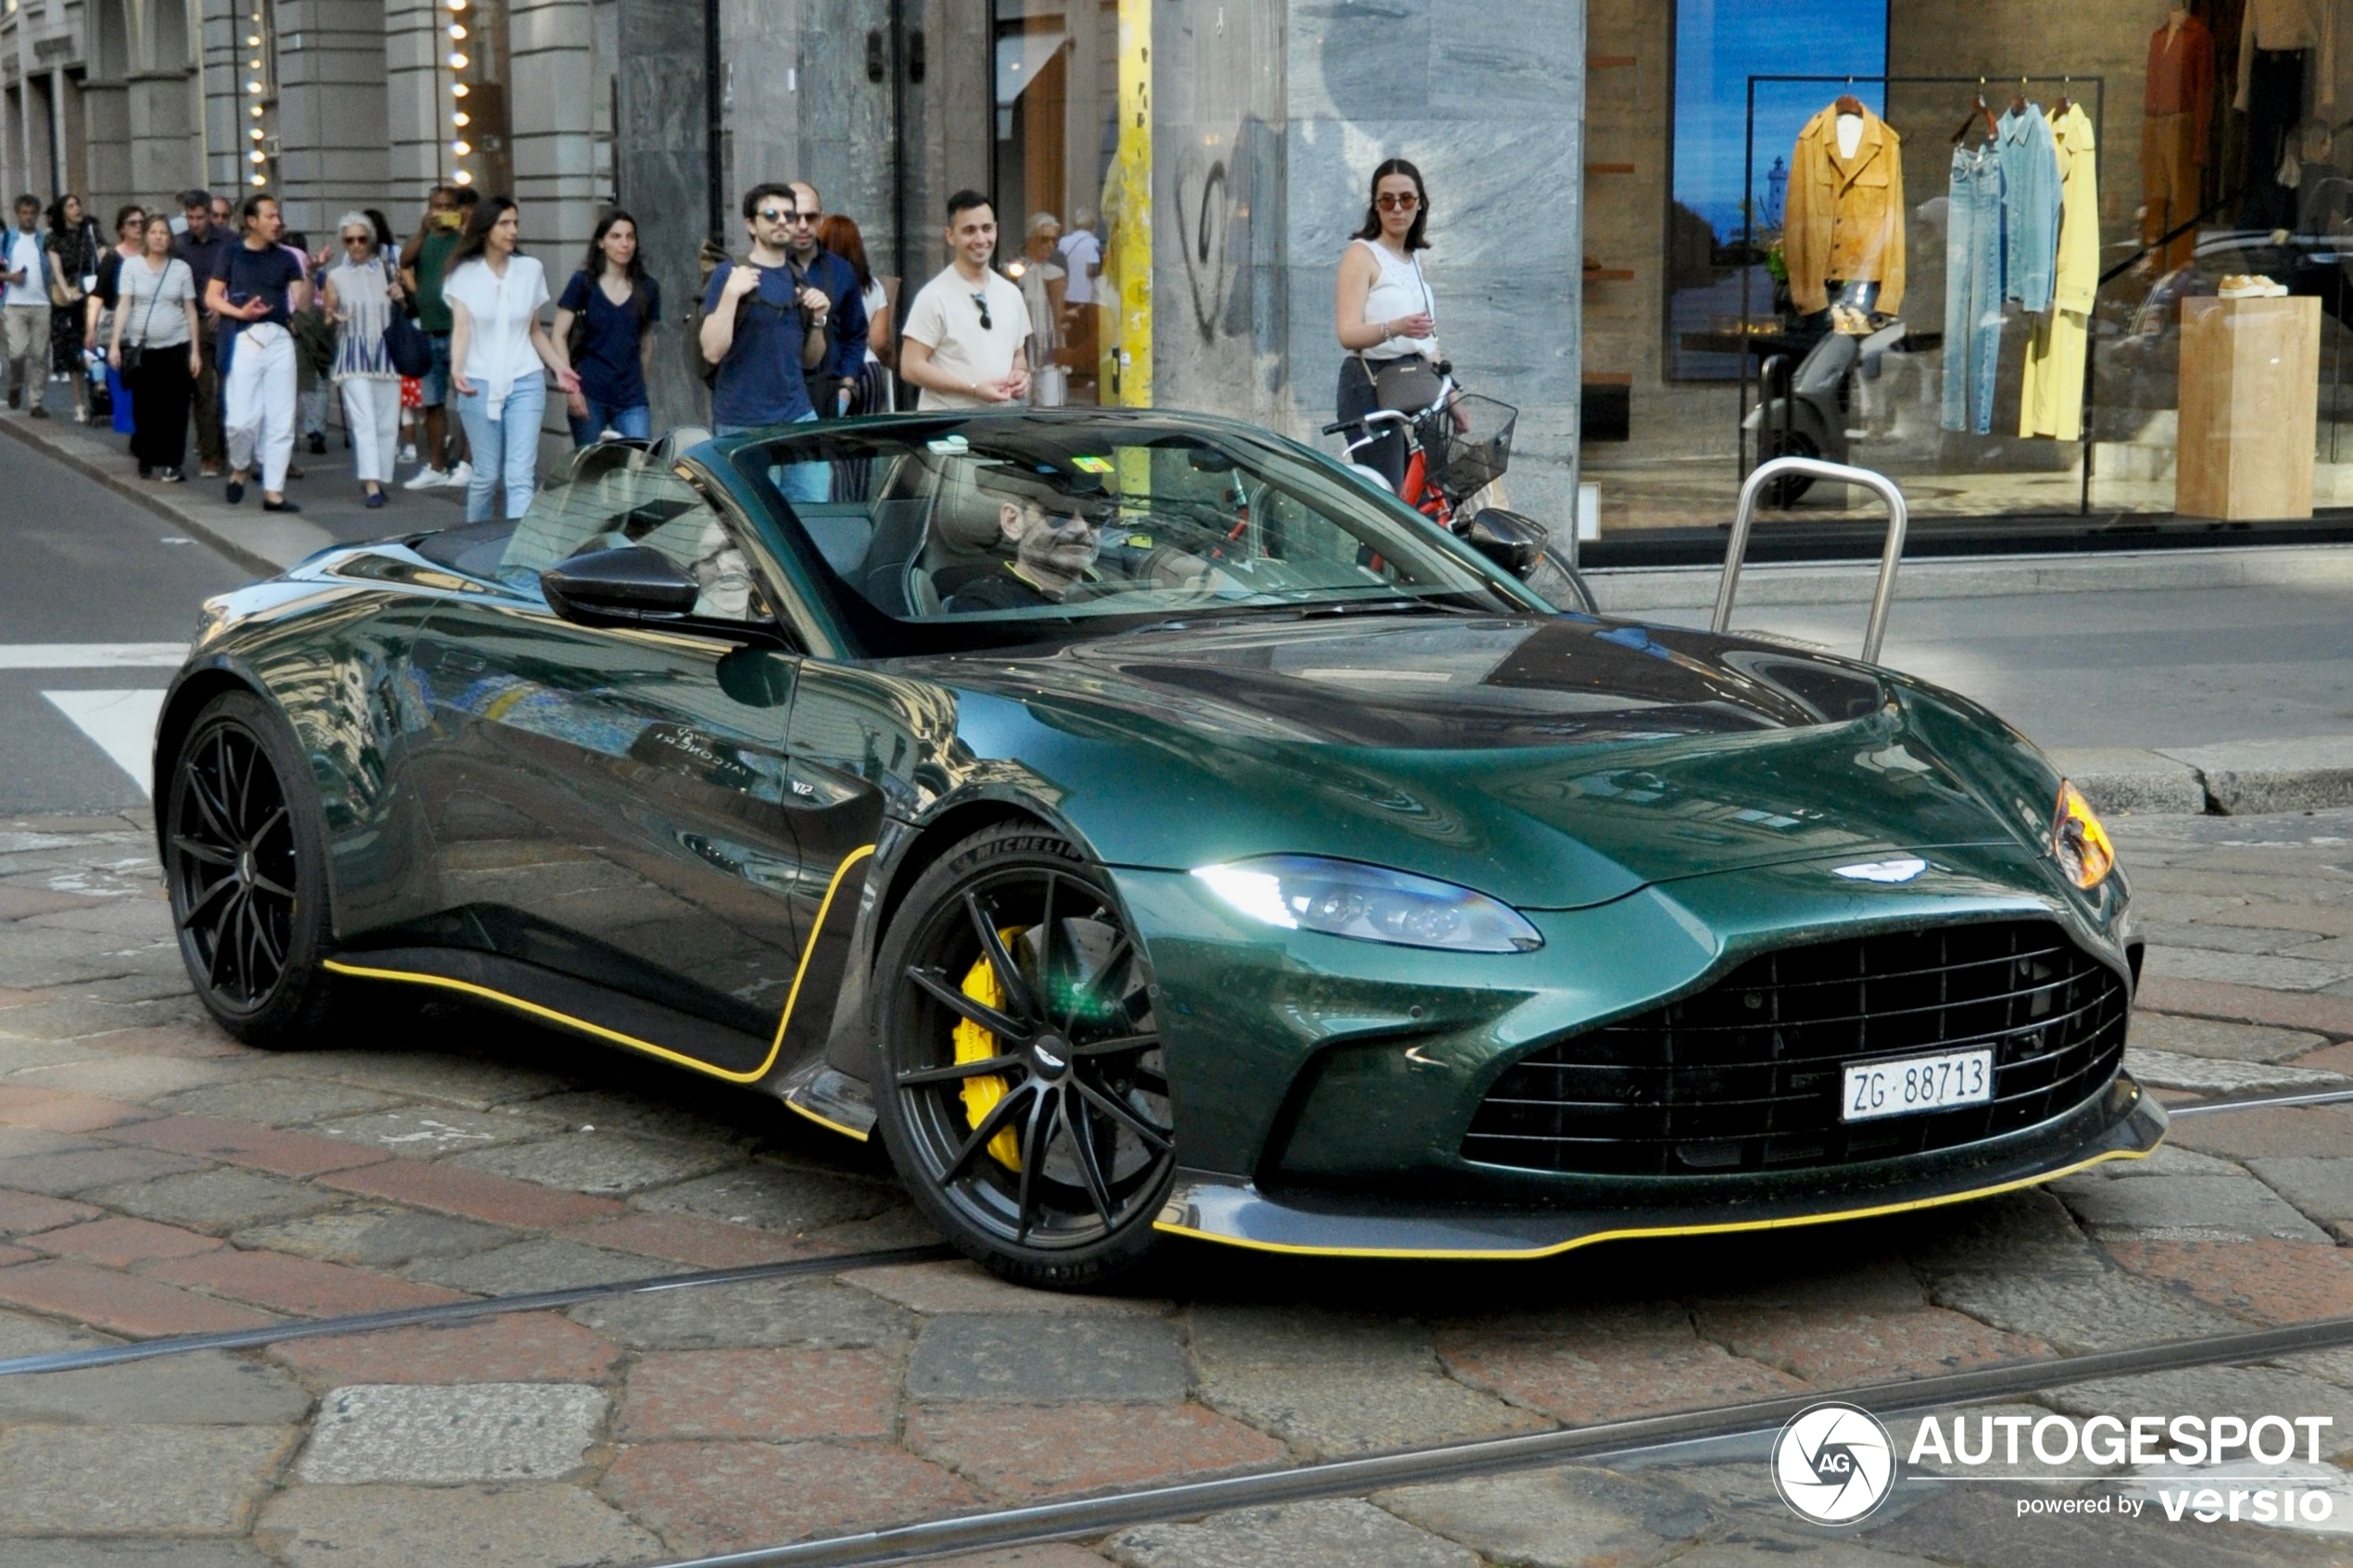 A brand new Aston Martin V12 Vantage Roadster shows up in Milan